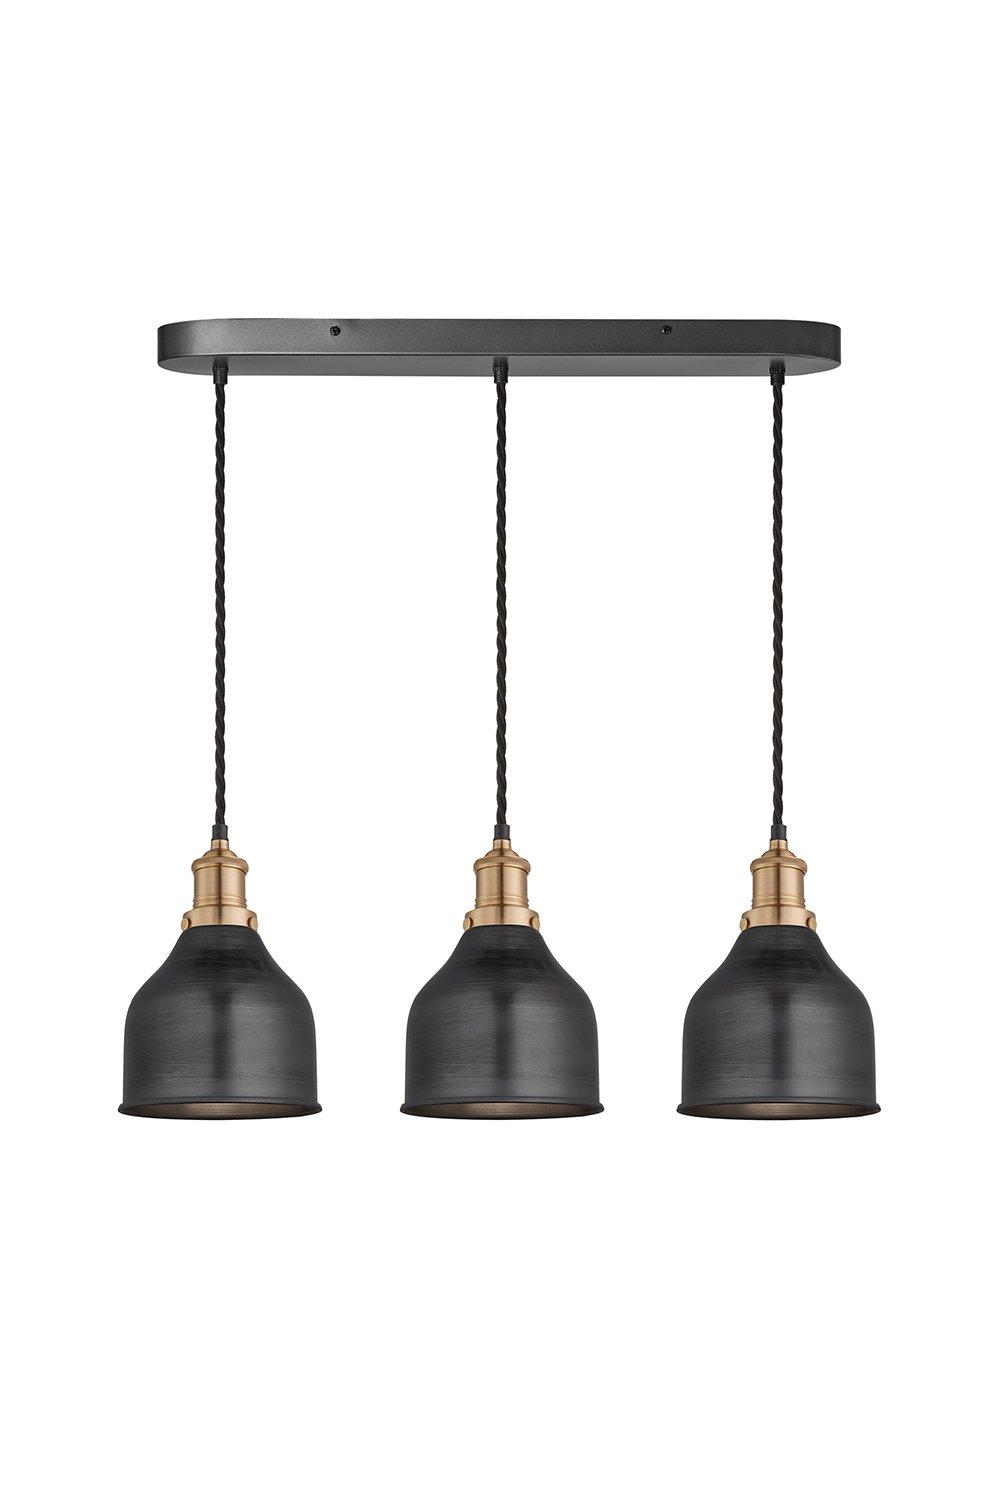 Brooklyn Cone 3 Wire Oval Cluster Lights, 7 inch, Pewter, Brass holder